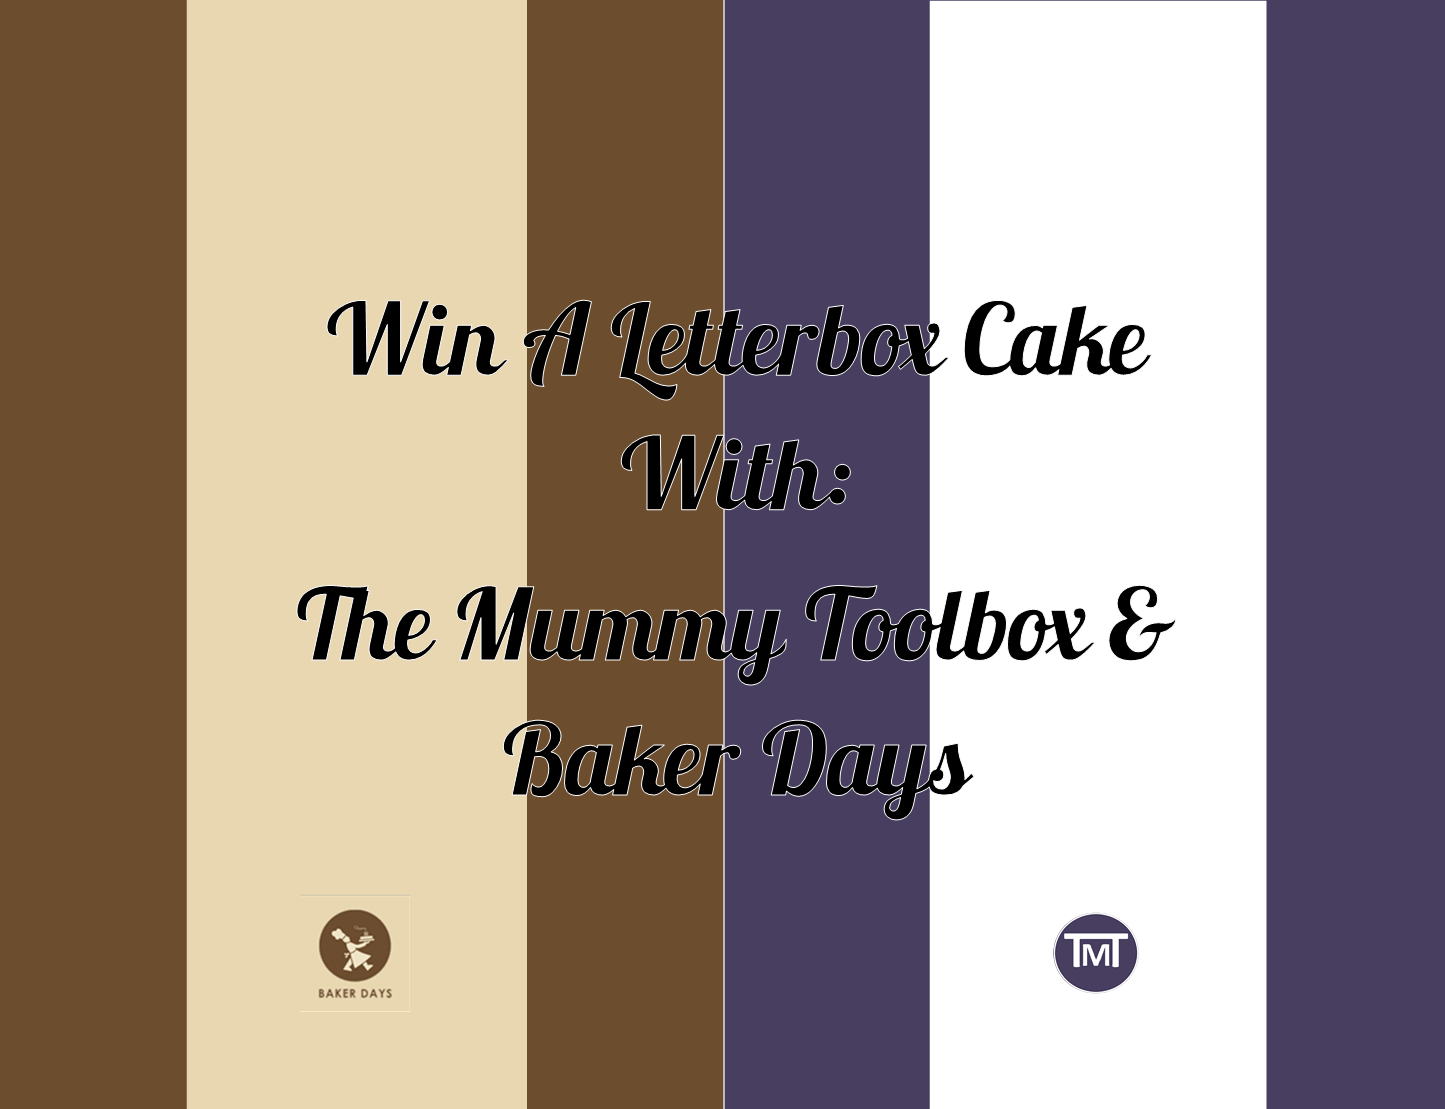 Win a letterbox cake with The mummy Toolbox & Baker Days